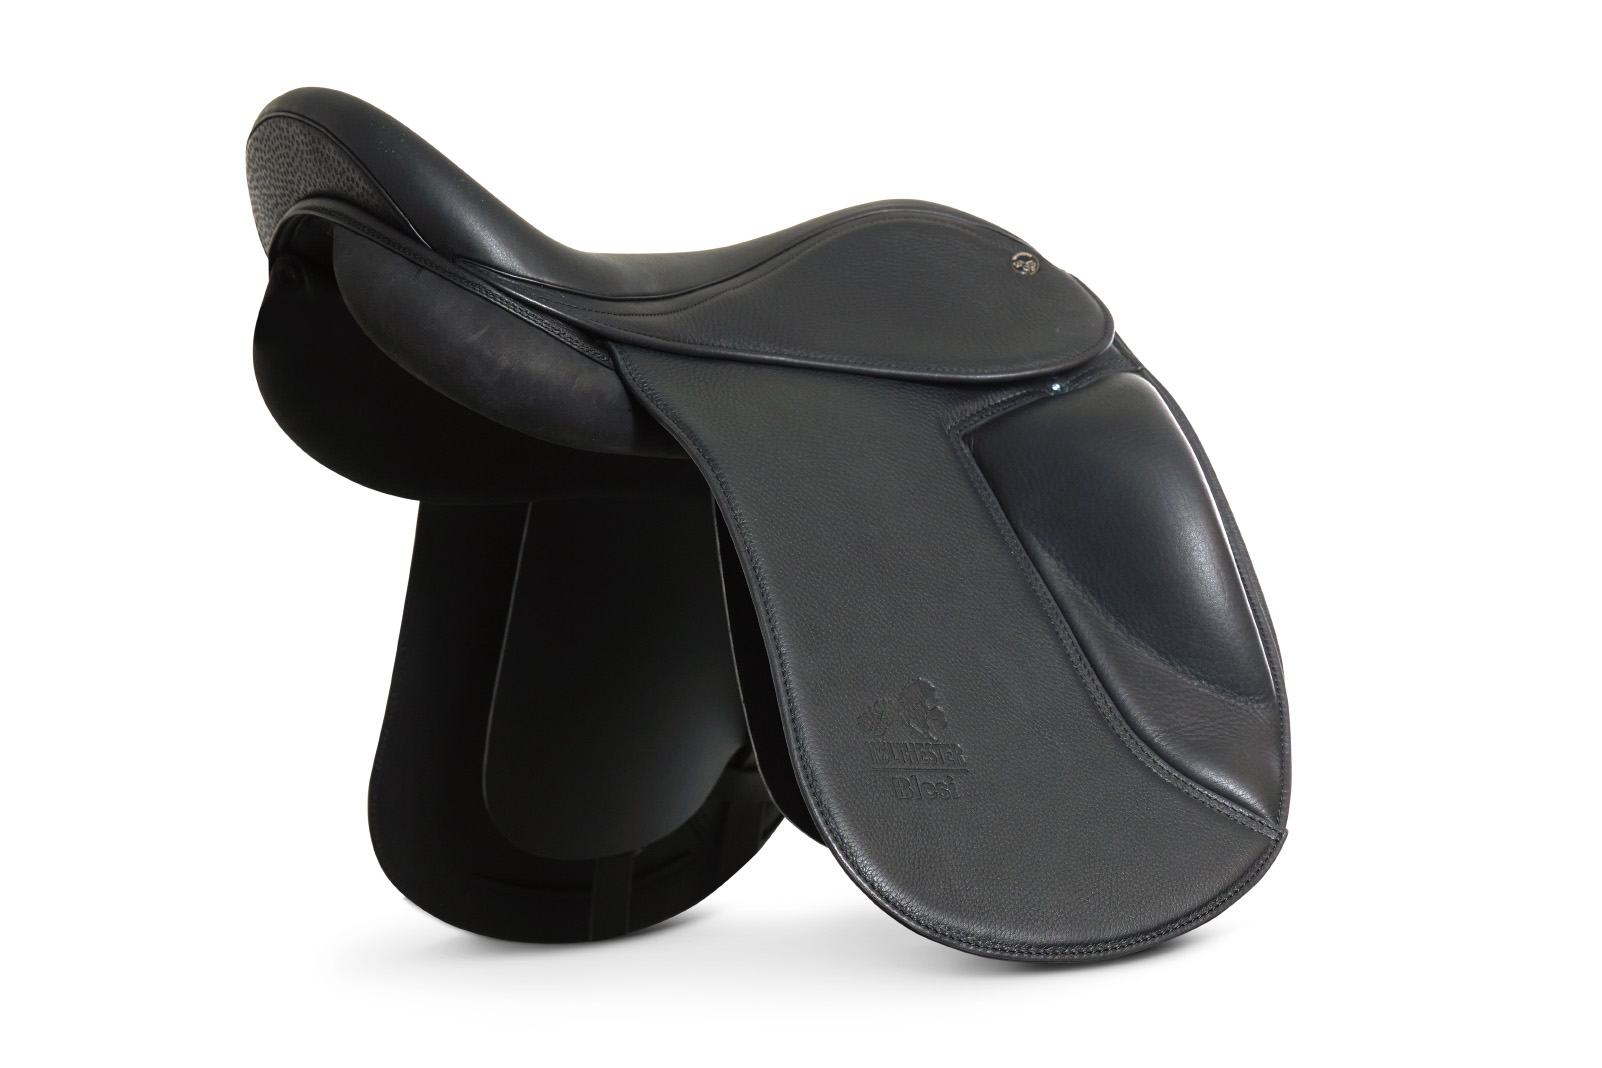 Blesi, brand new saddle from Tølthester on an L boom